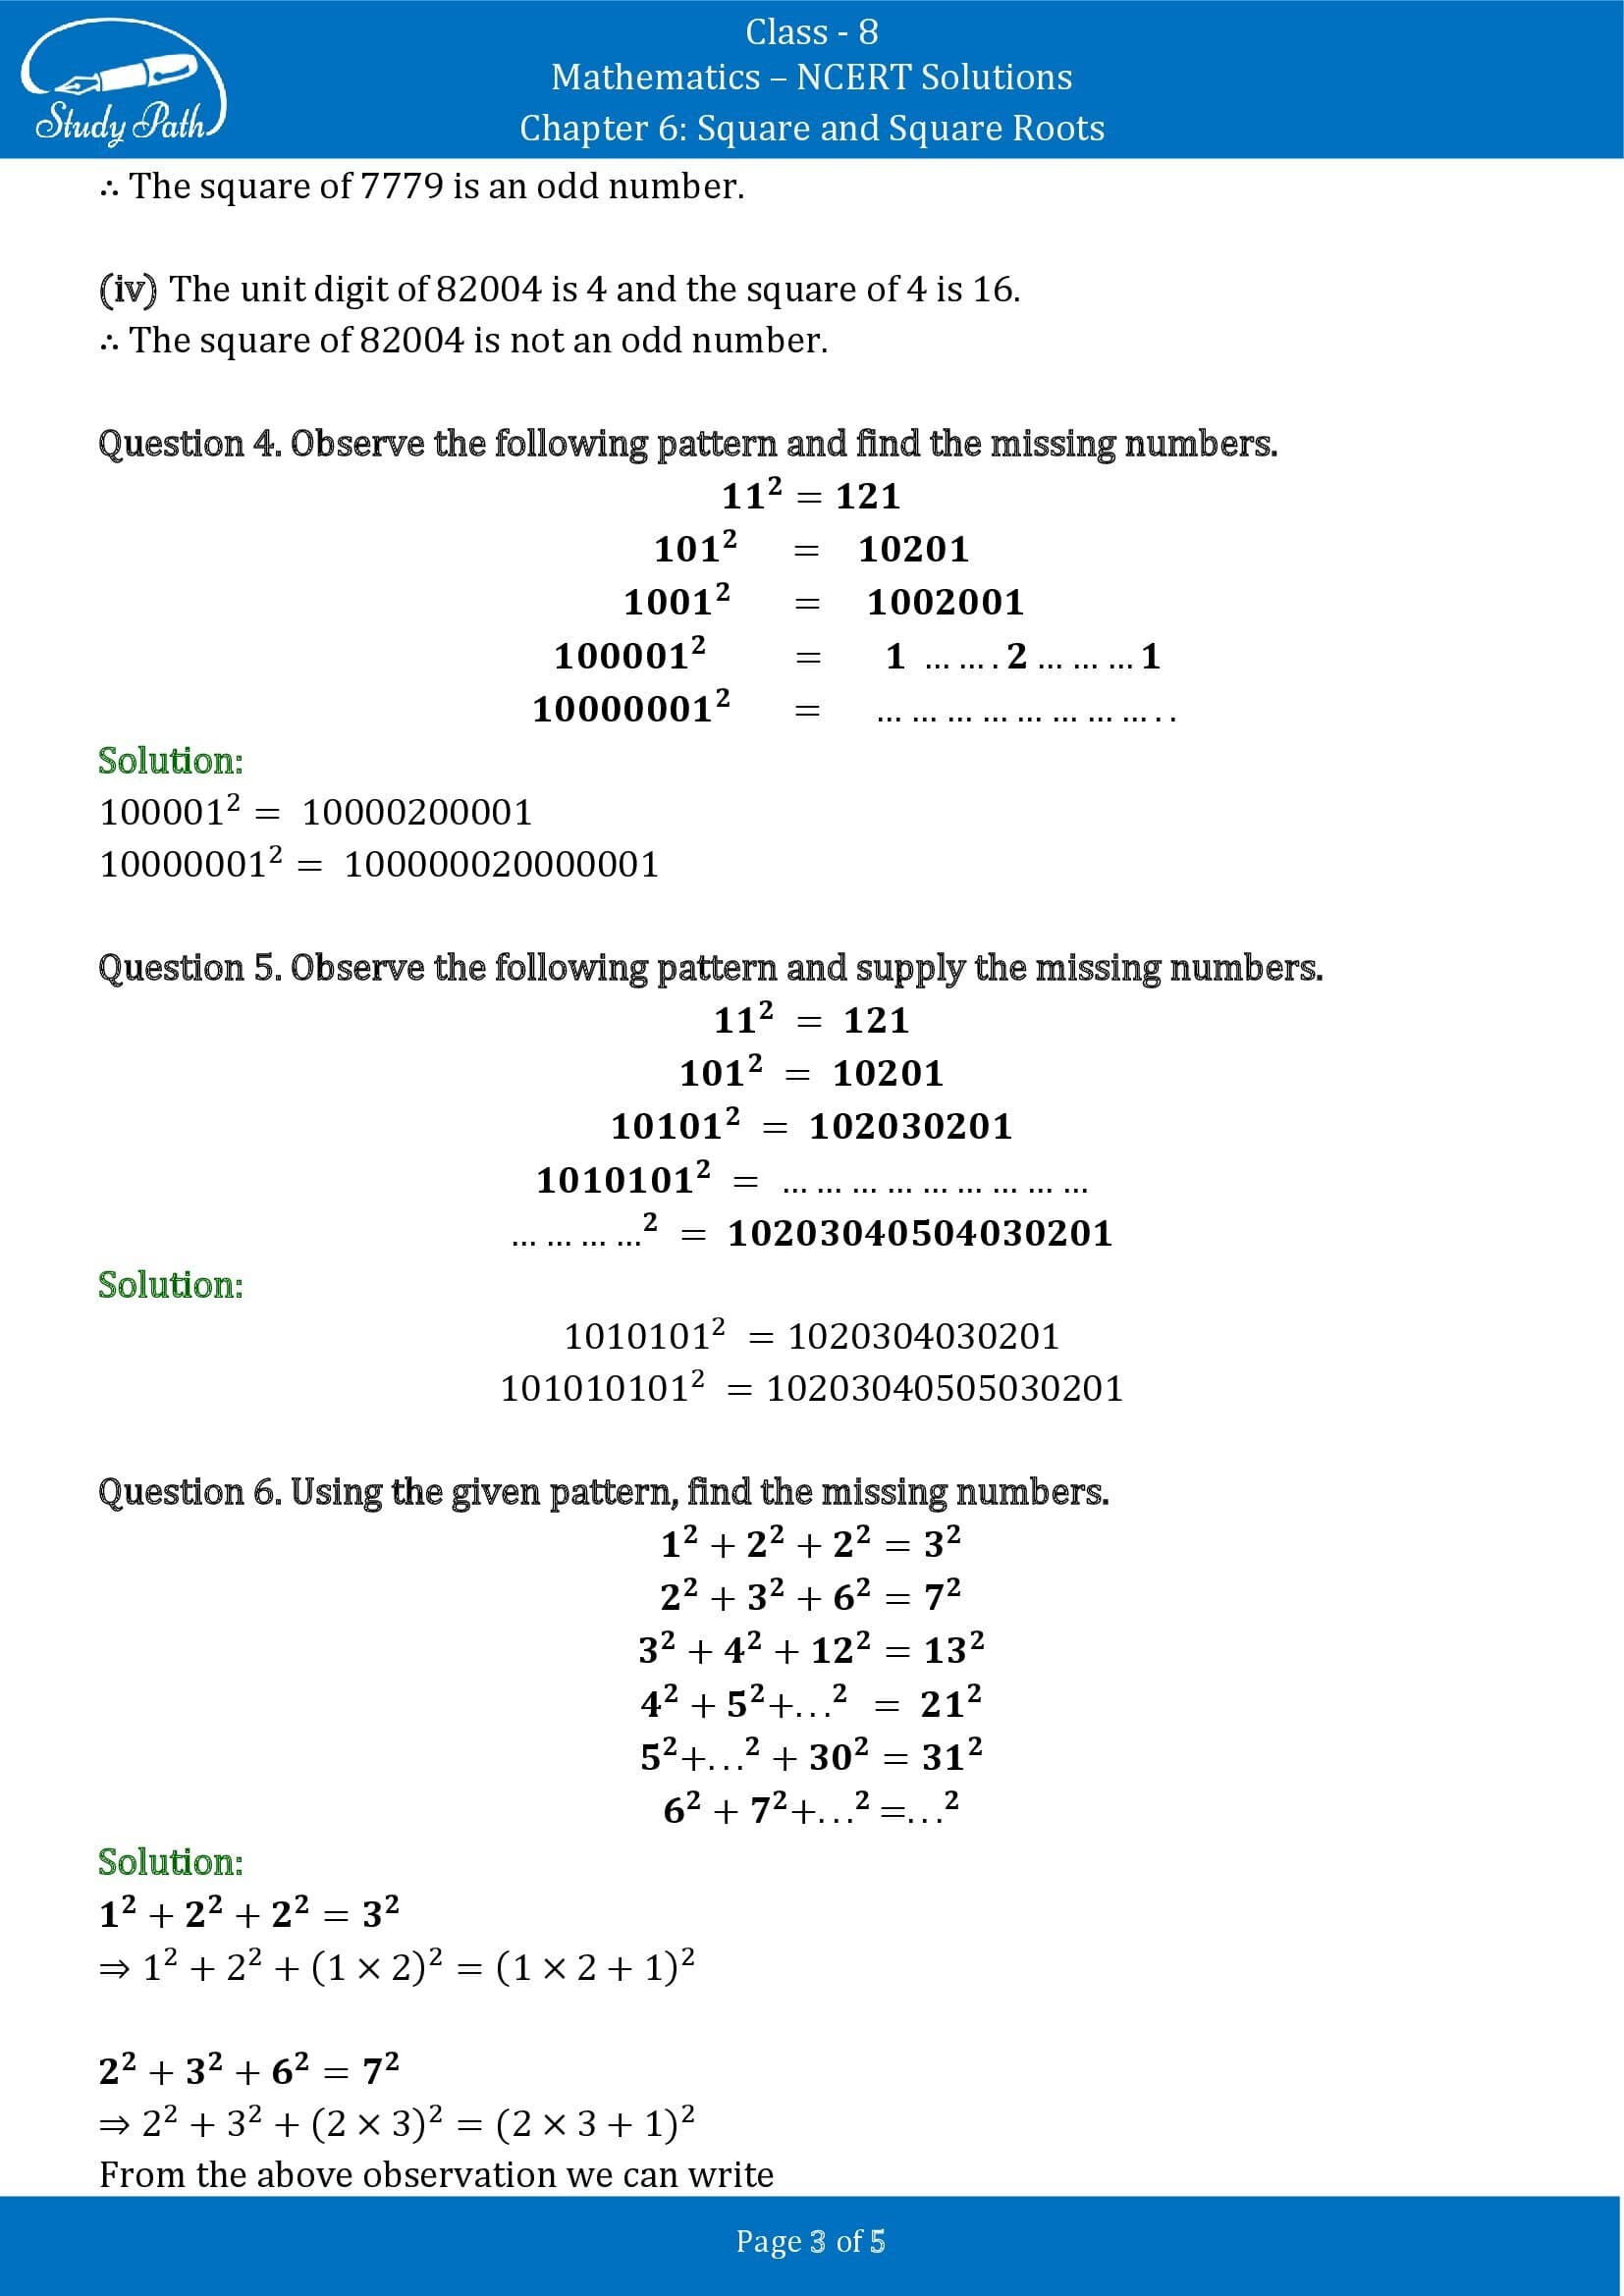 NCERT Solutions for Class 8 Maths Chapter 6 Square and Square Roots Exercise 6.1 00003